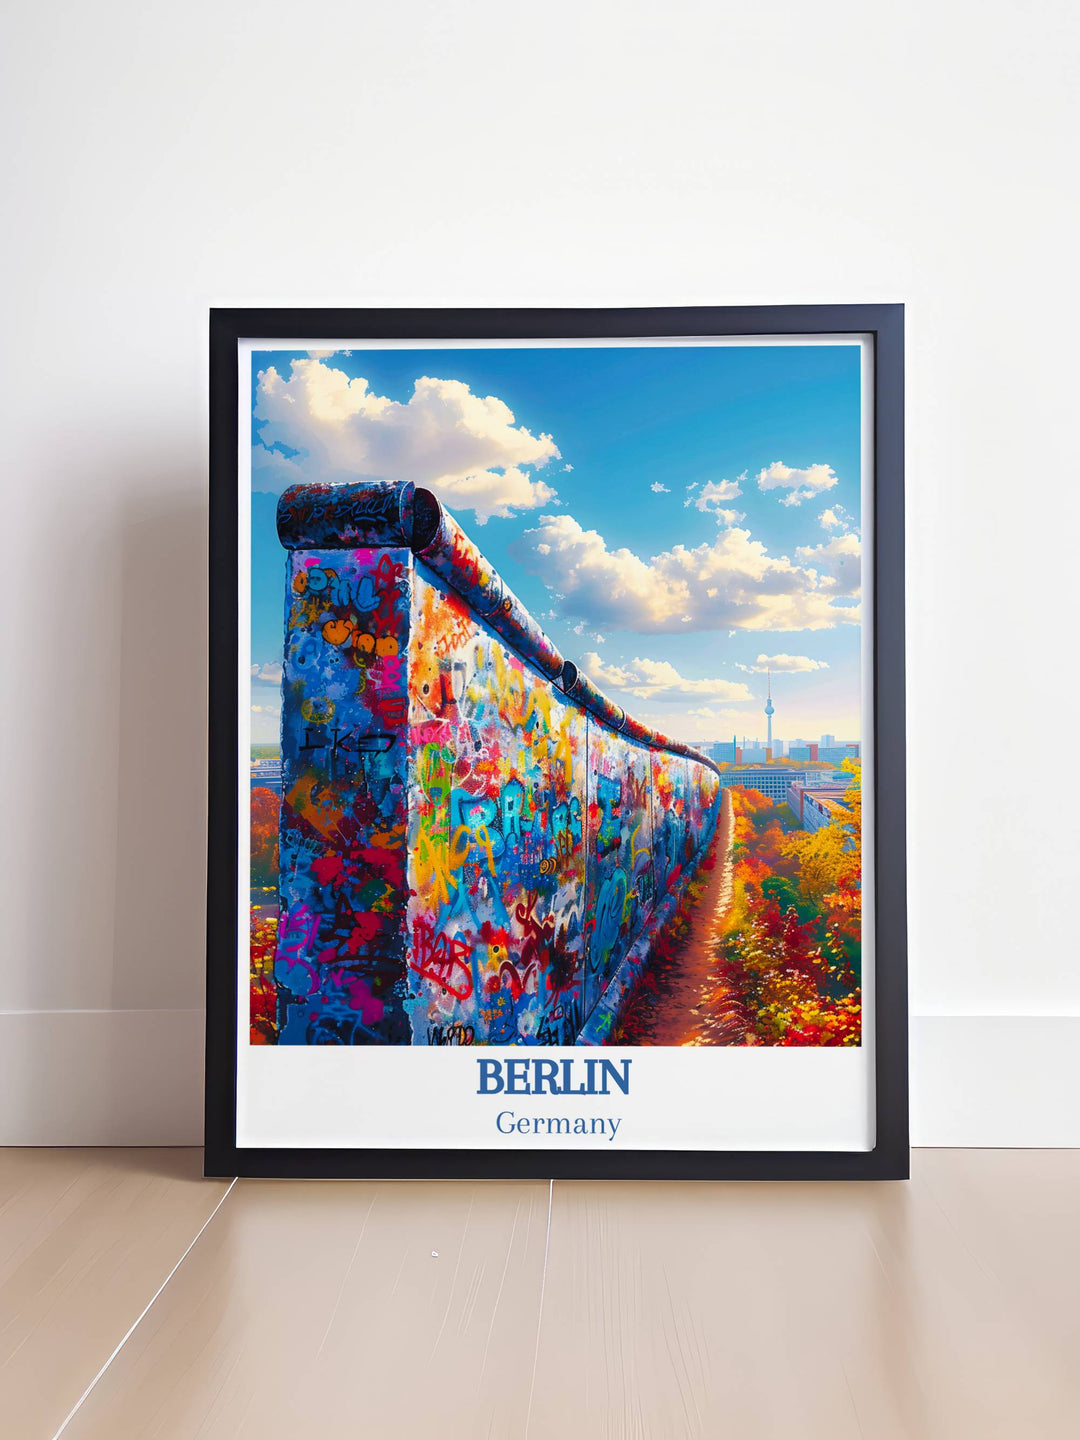 Luxurious Brandenburg Gate wall art framed for an elegant addition to home or office spaces.